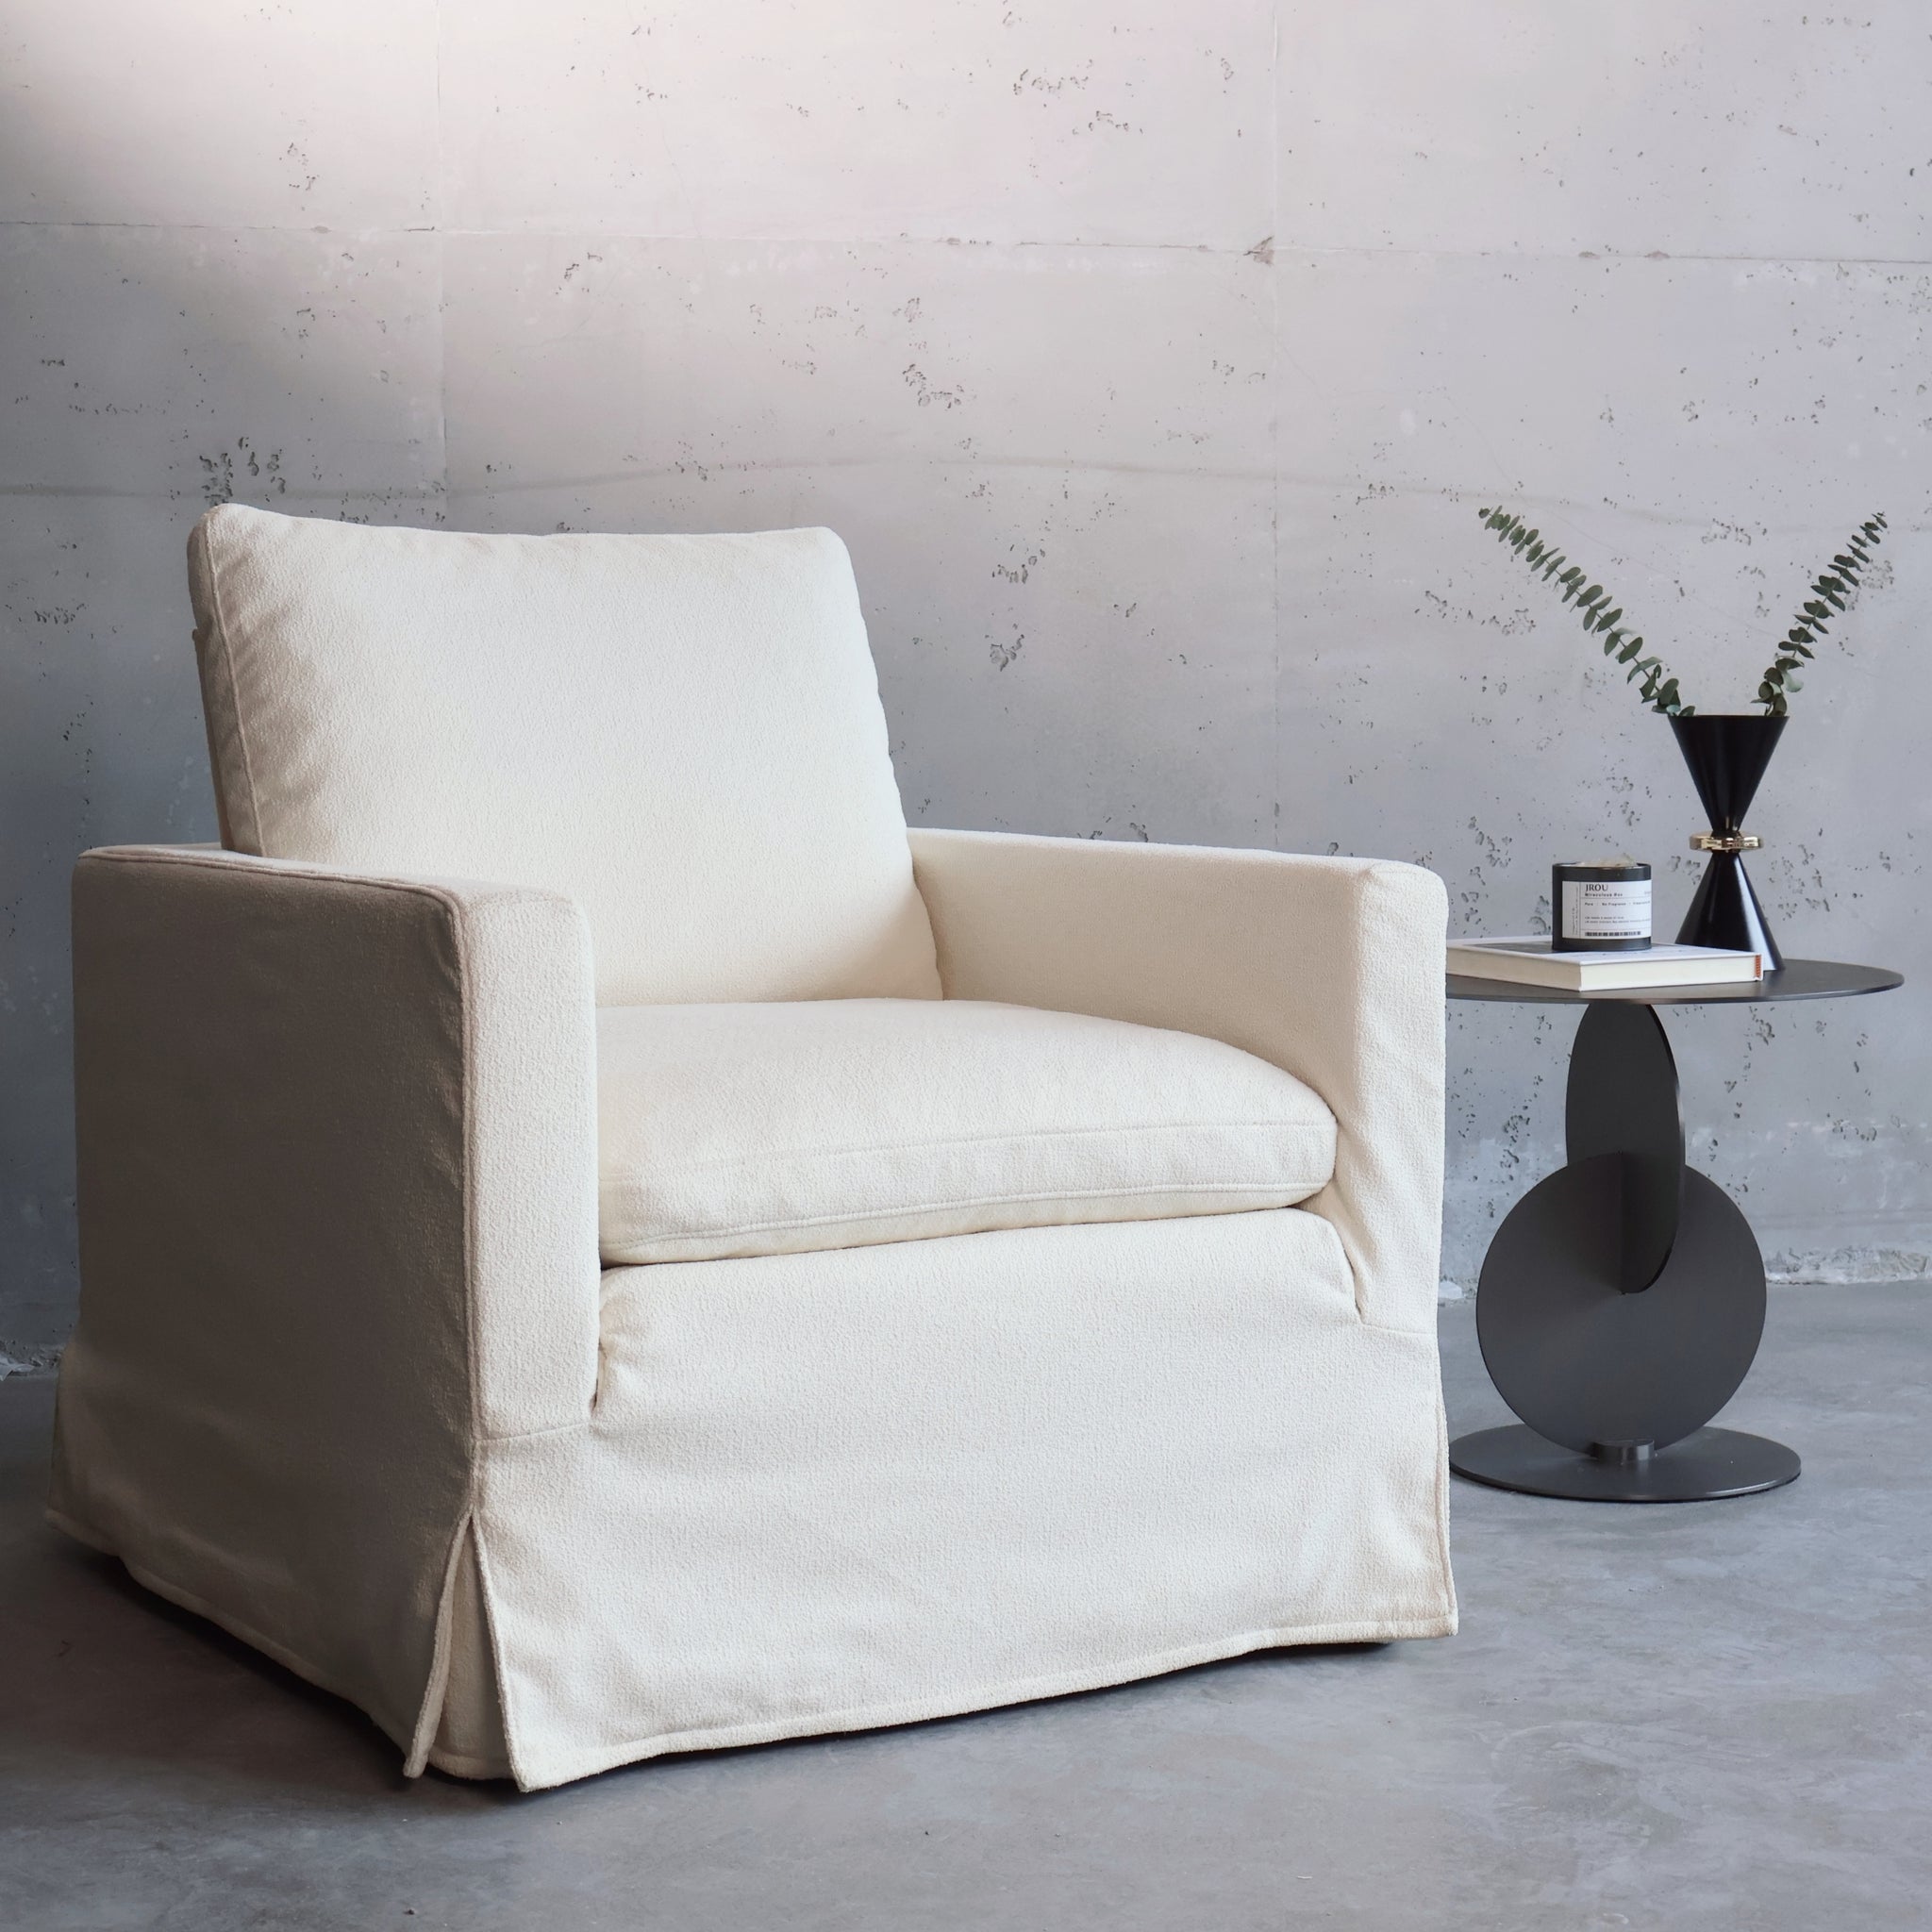 Swivel Chair with Loose Cover, Beige Fabric, Solid beige-primary living